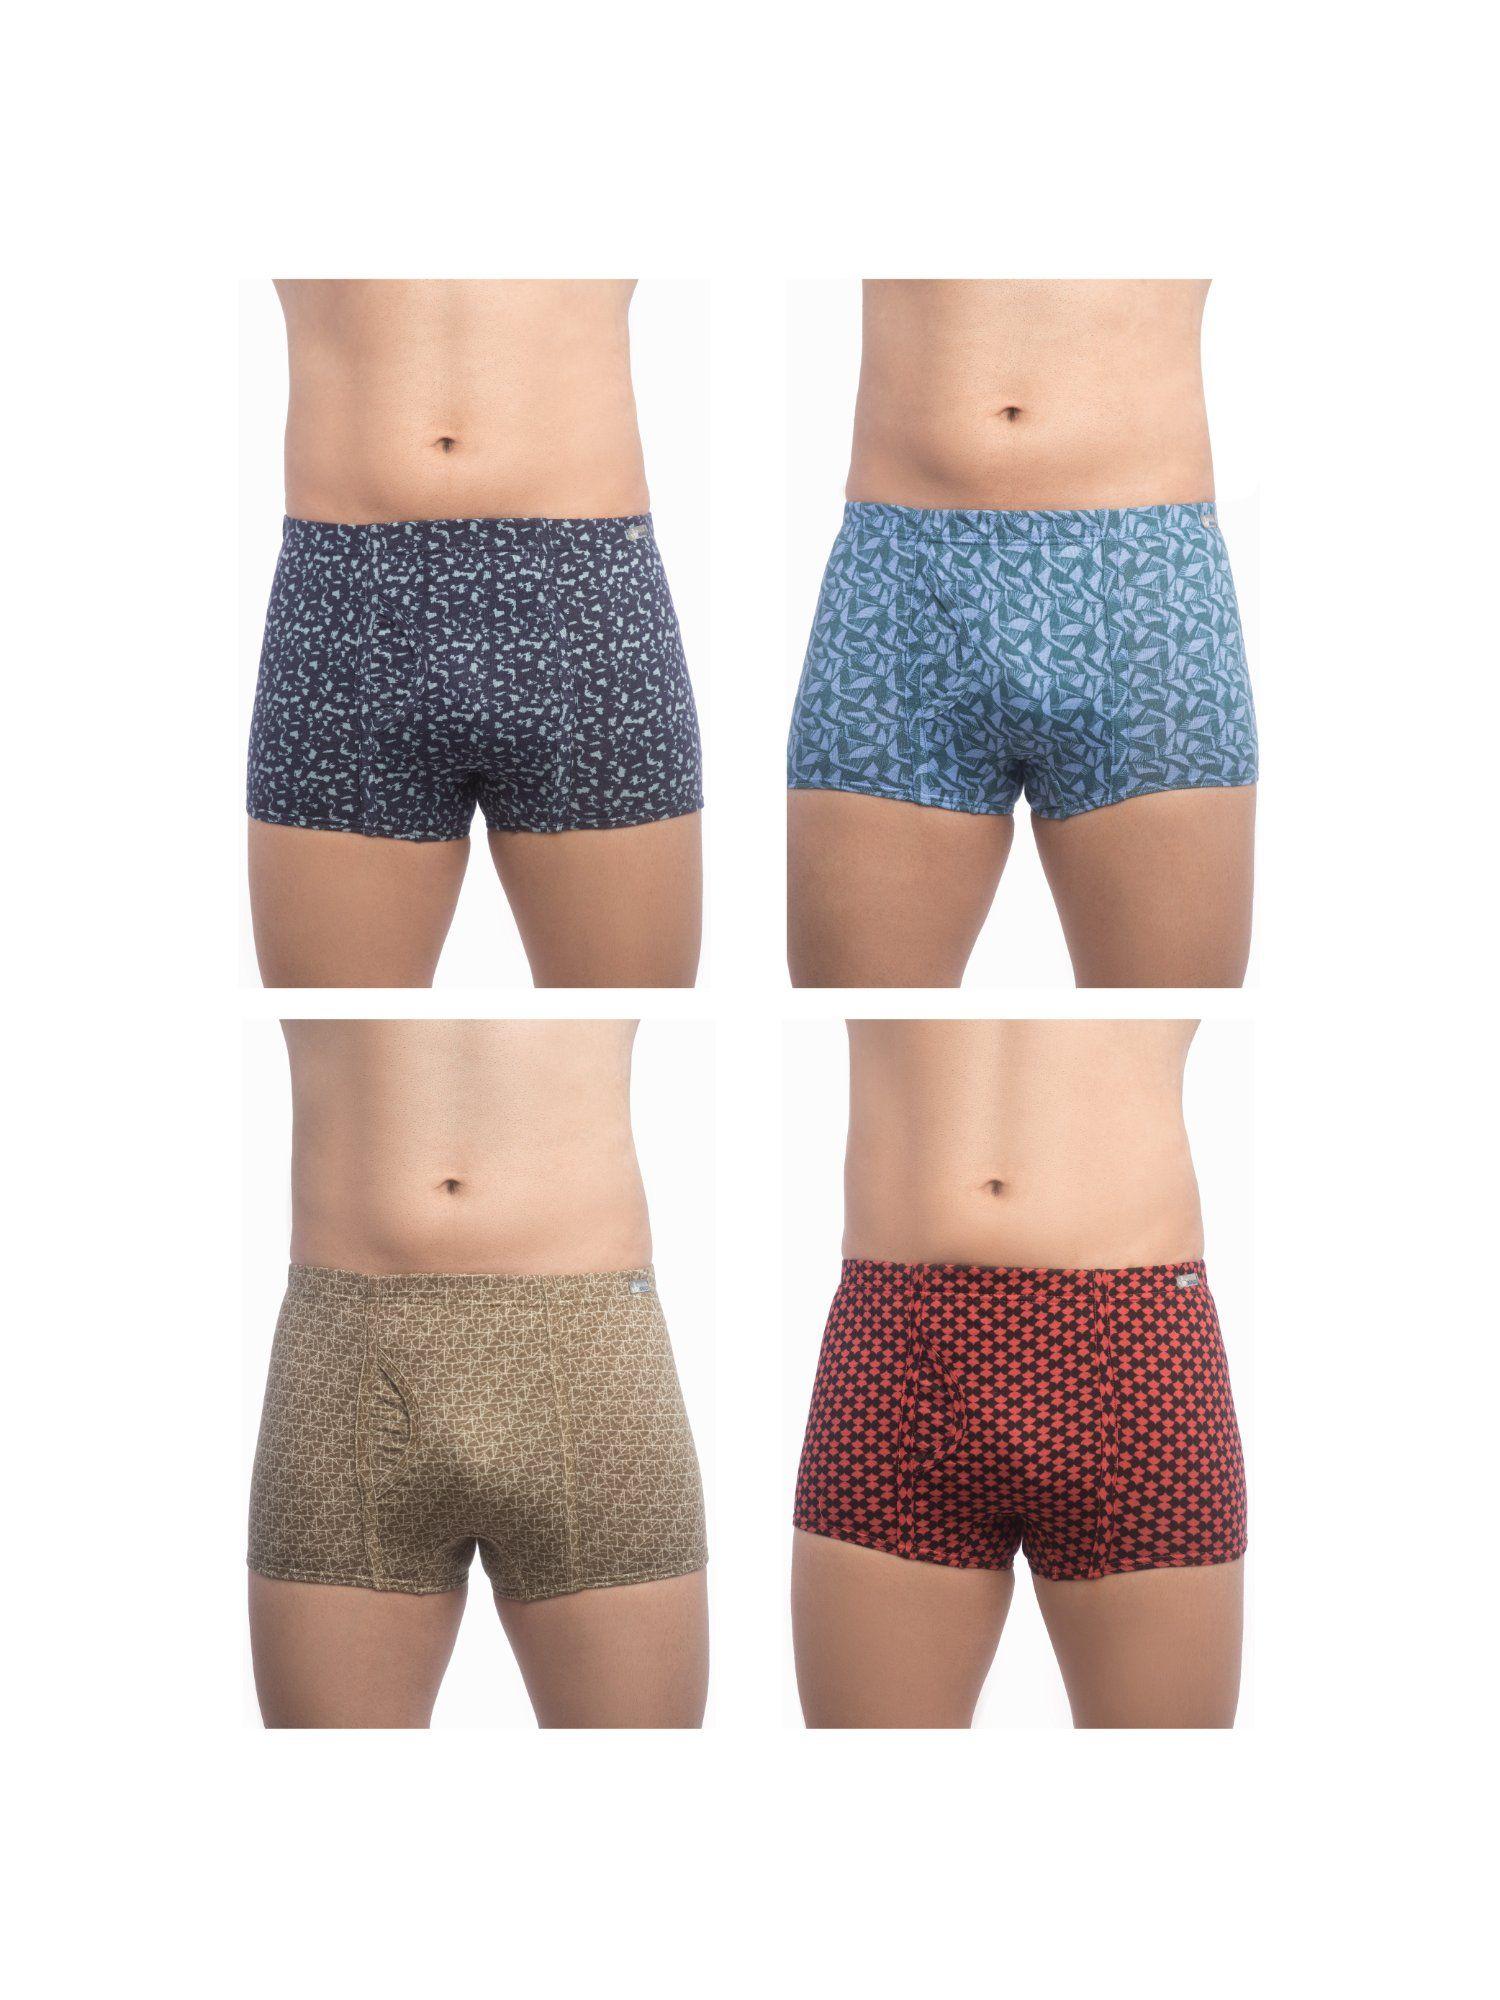 mens cotton brando printed mini trunks, colors & prints may vary (pack of 4)